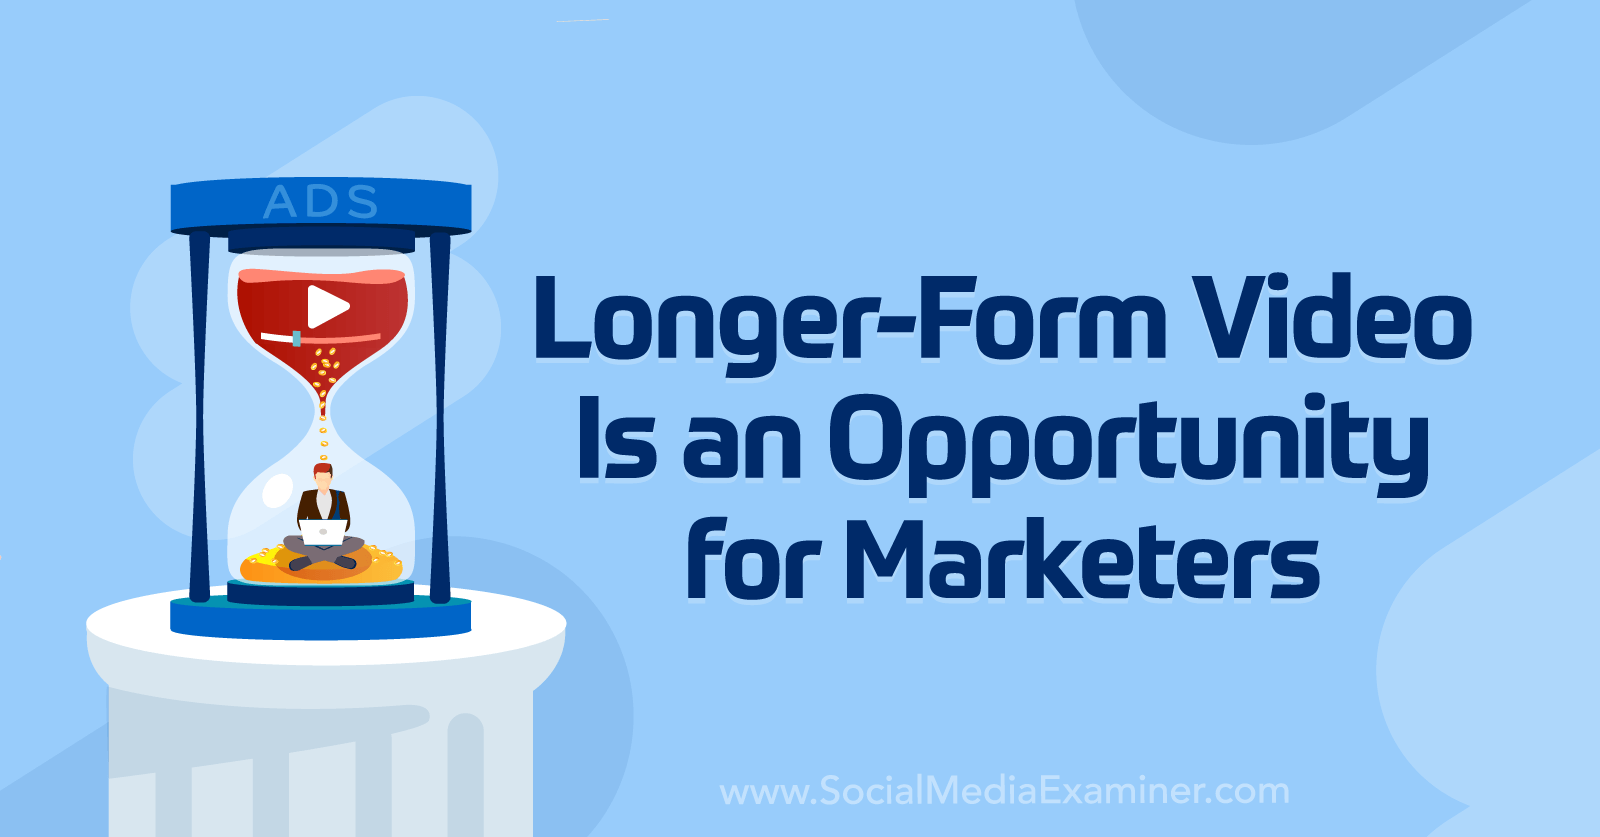 Longer-Form Video Is an Opportunity for Marketers by Michael Stelzner